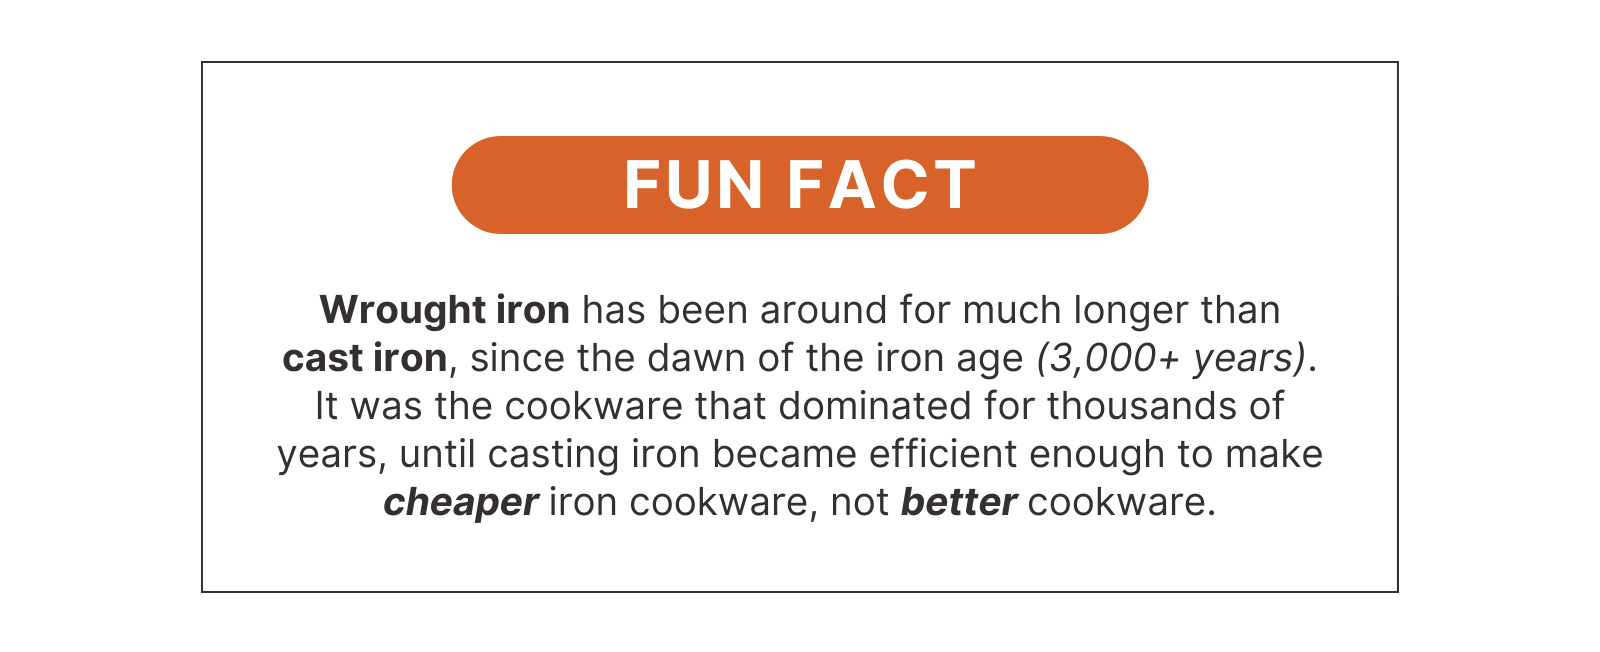 Solidteknics iron cookware blog - Wrought iron has been around for much longer than cast iron, since the dawn of the iron age (3,000+ years). It was the cookware that dominated for thousands of years, until casting iron became efficient enough to make cheaper iron cookware, not better cookware.